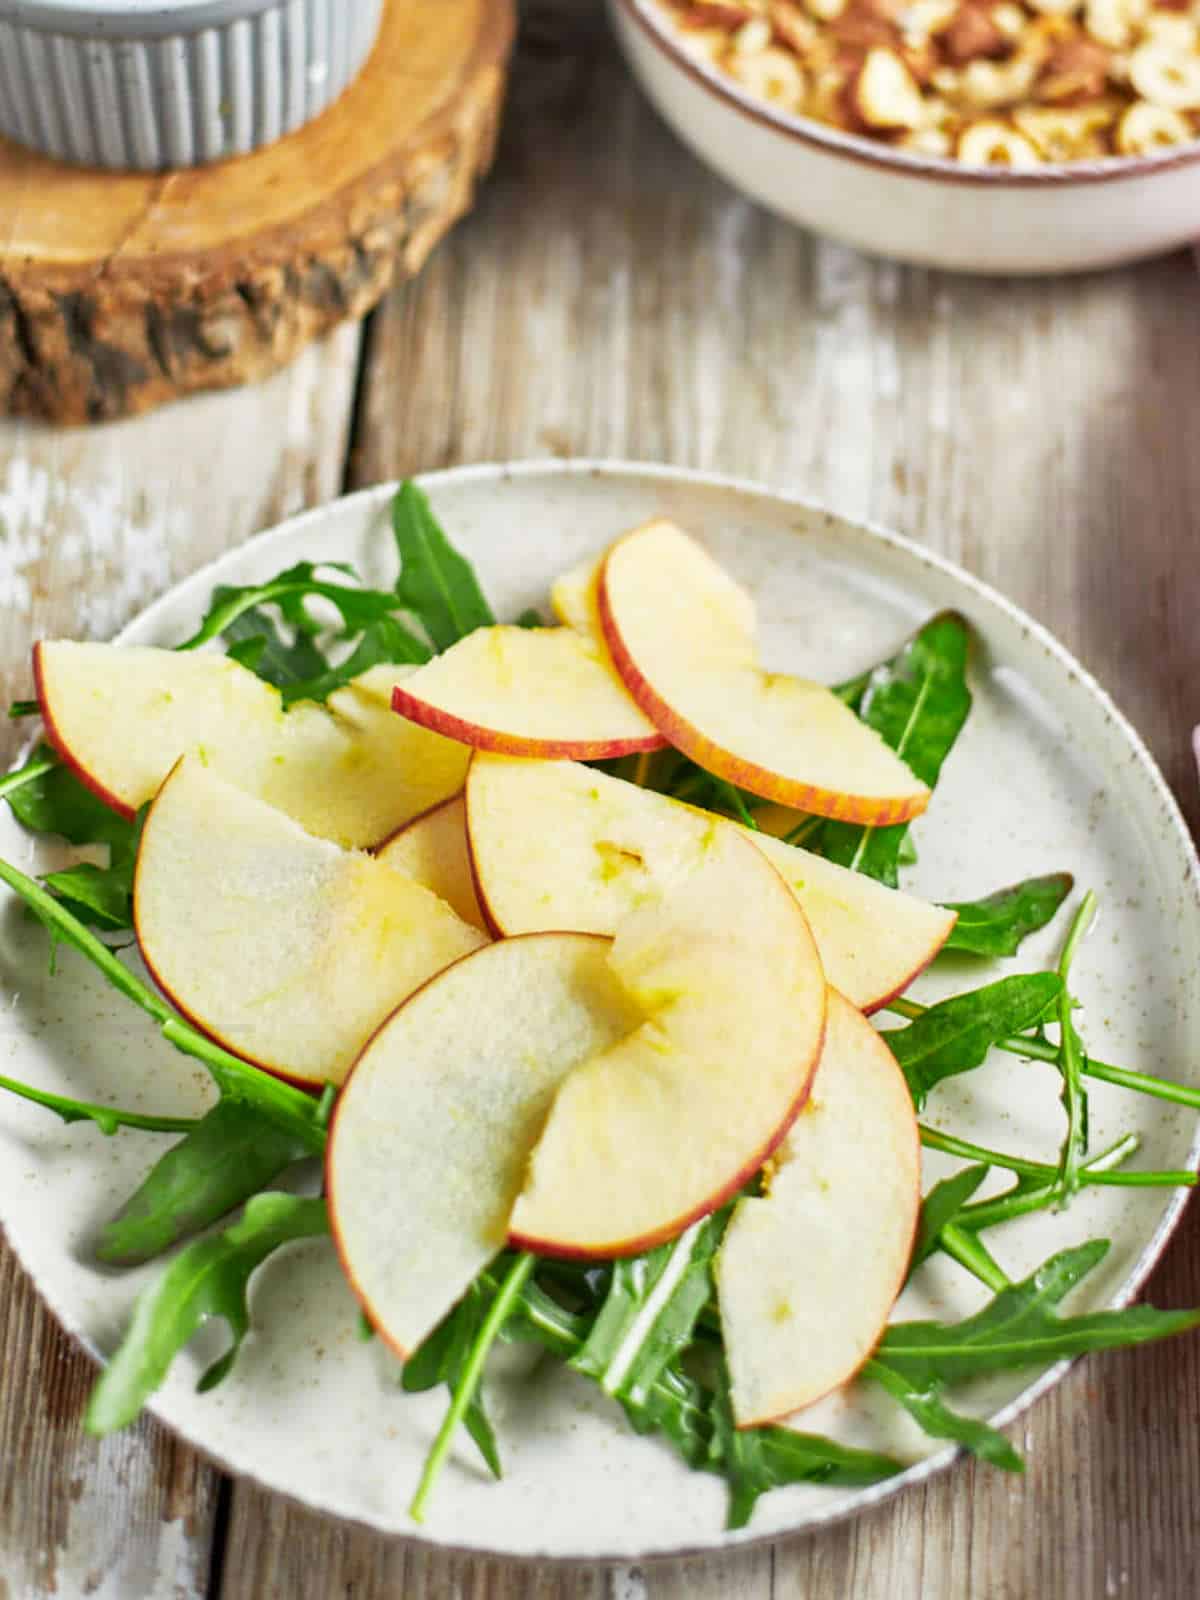 Thinly sliced apples on top of arugula leaves.